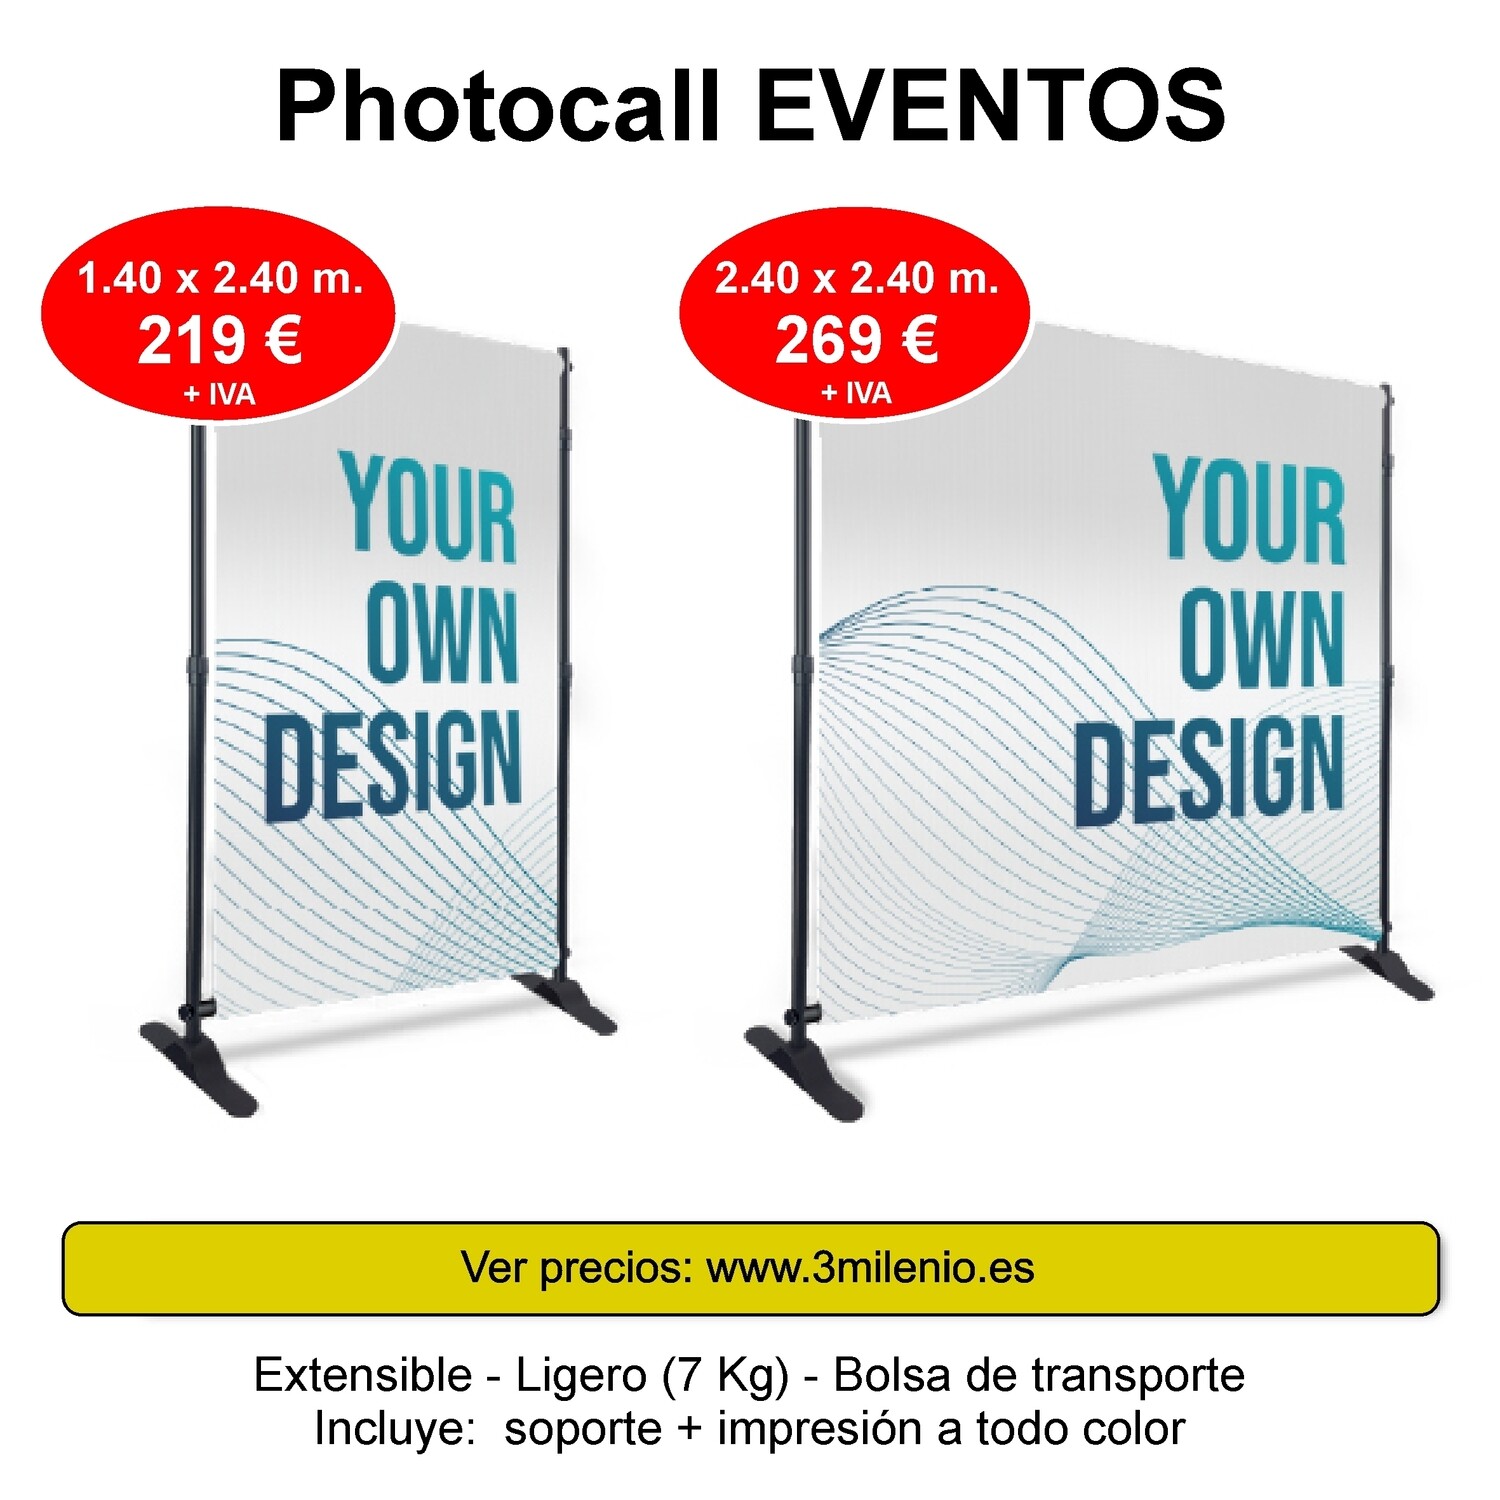 Photocall Extensible 2.40 x 1.40 m